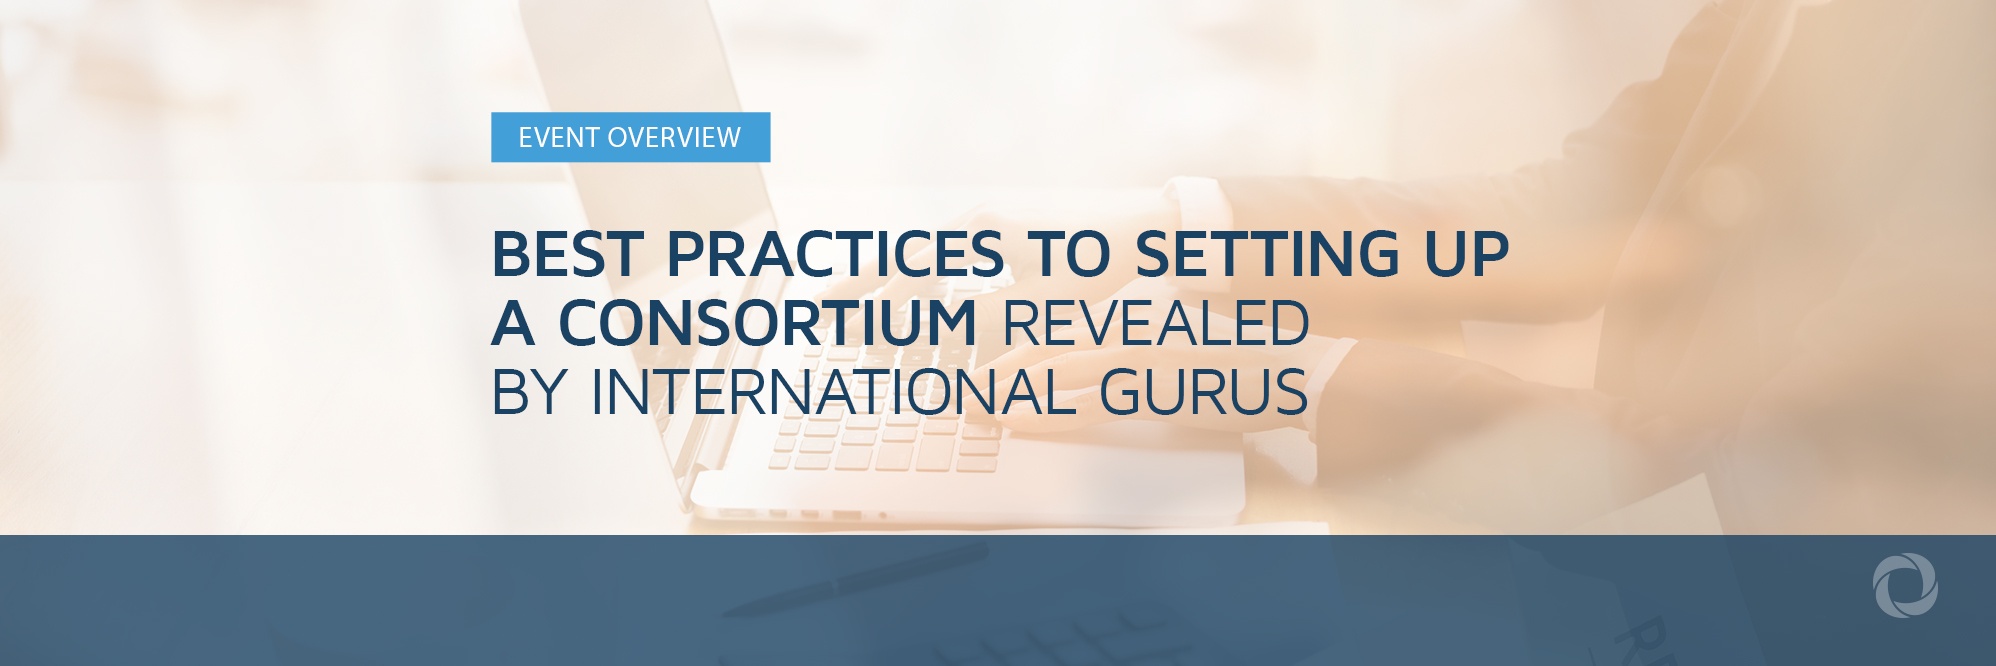 Best practices to setting up a consortium revealed by international gurus